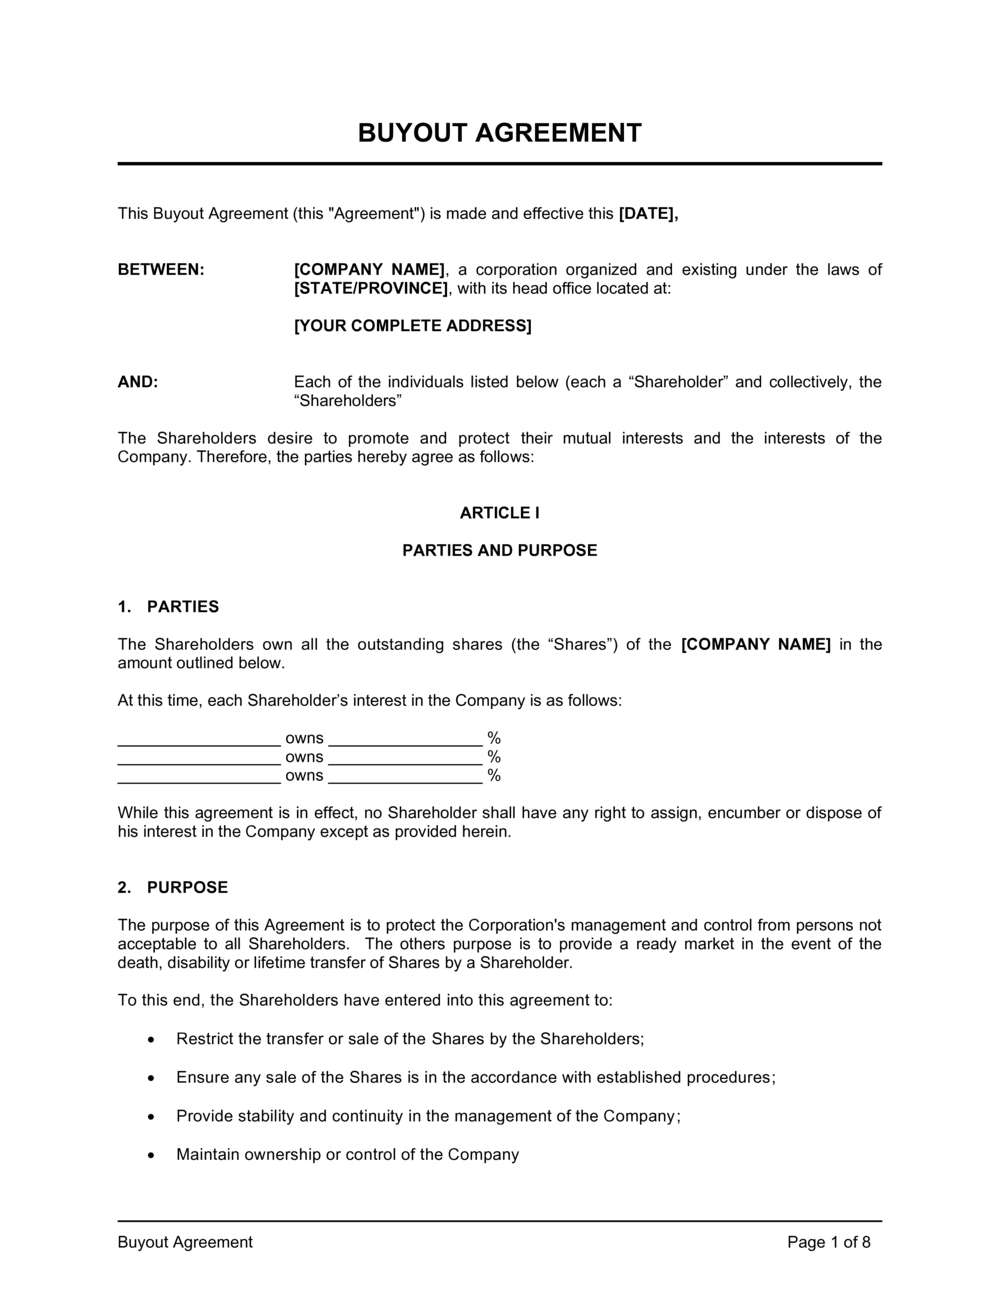 Buyout Agreement Template  by Business-in-a-Box™ With Regard To buyout agreement template